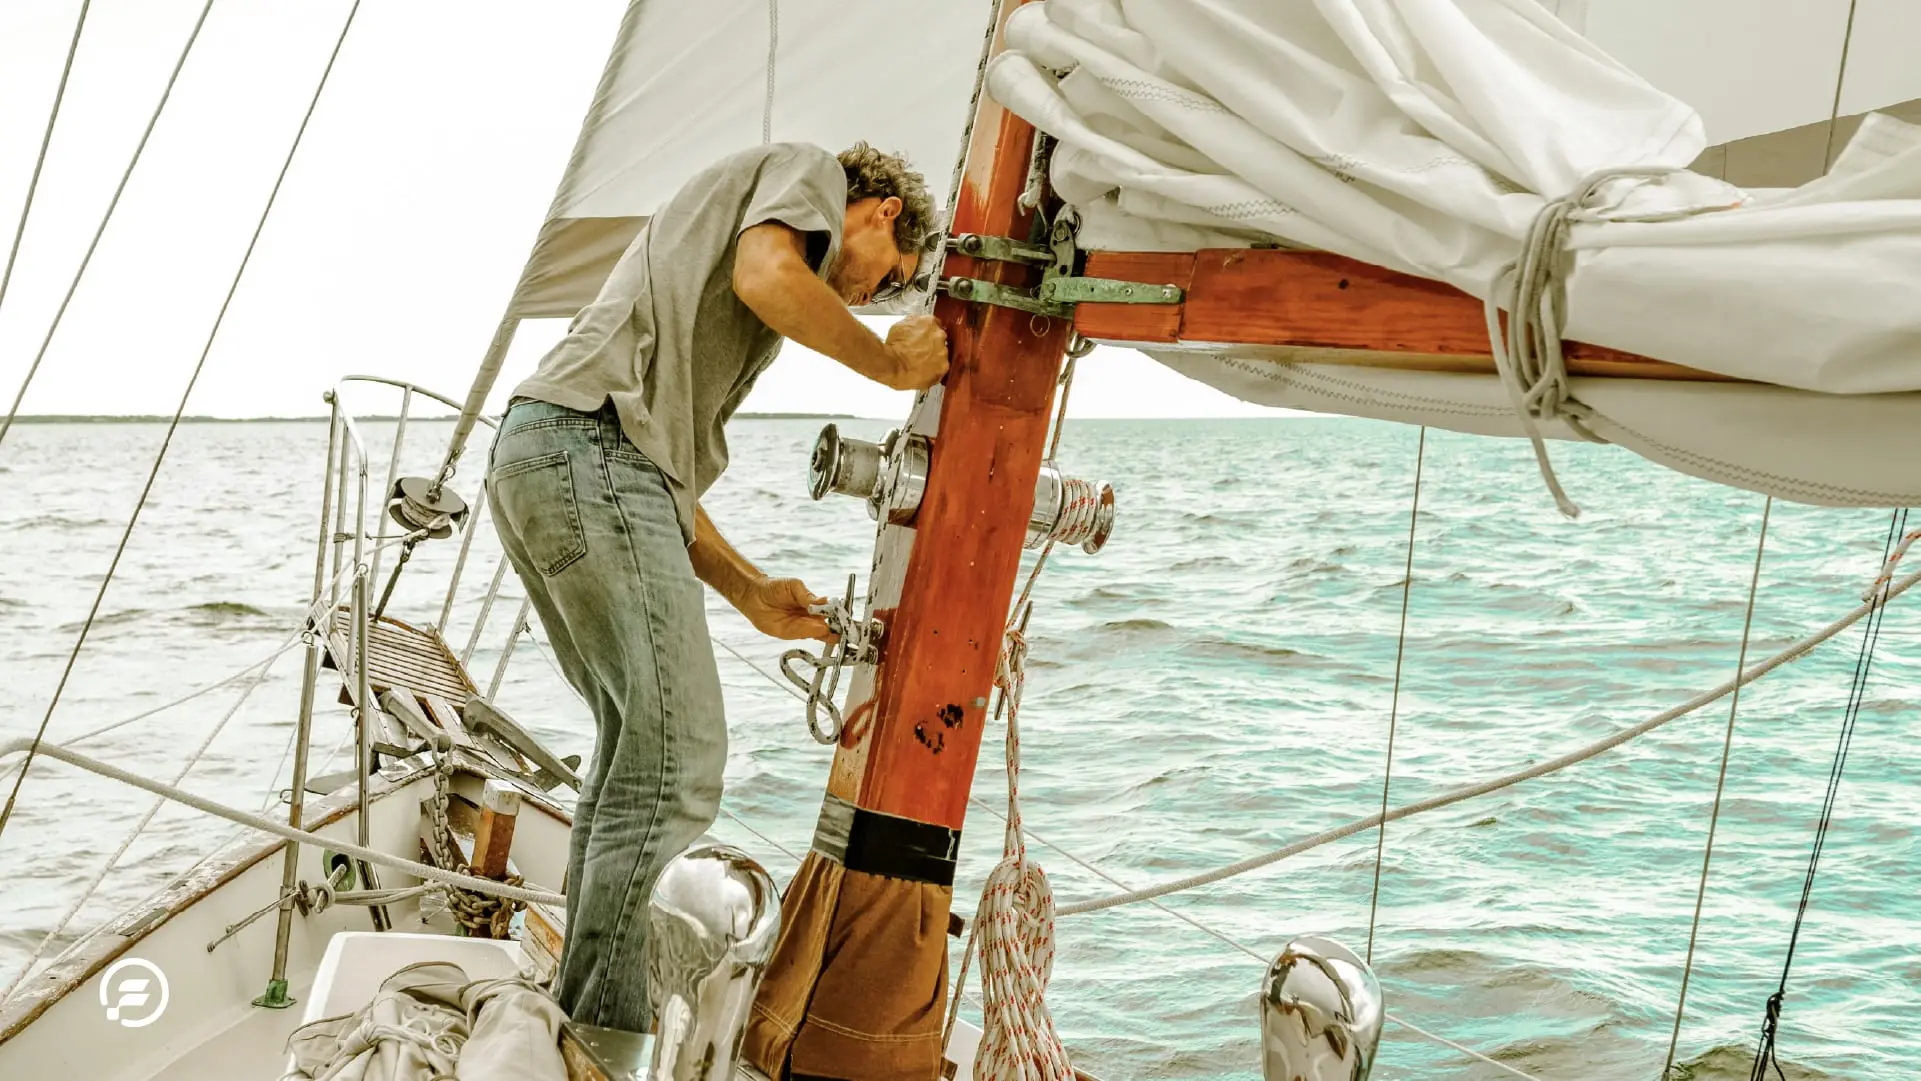 A man working on the deck of his sailboat